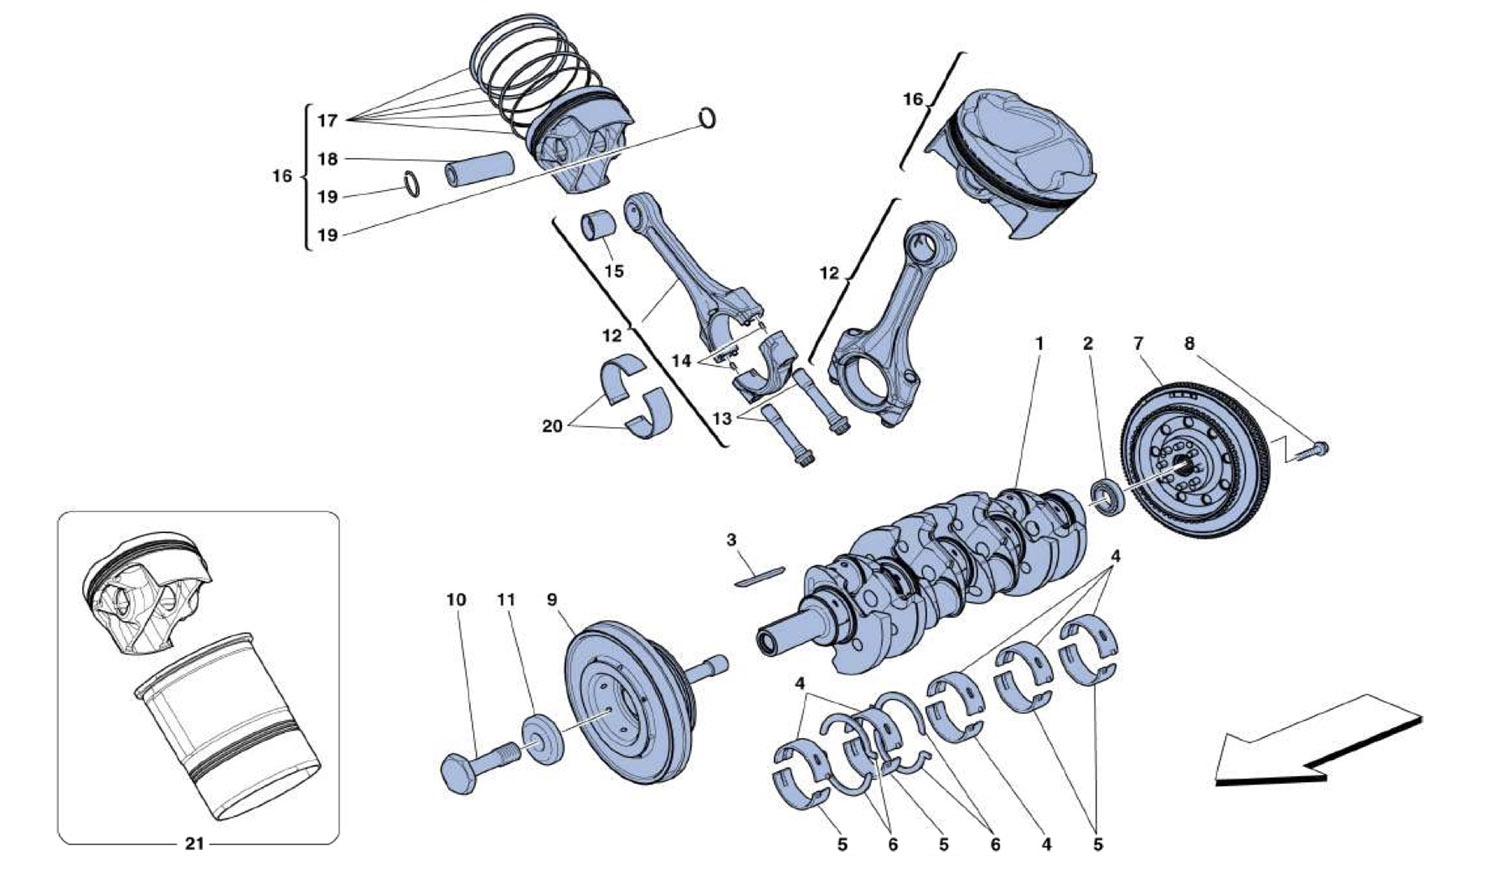 Schematic: Driveshaft - Connecting Rods And Pistons